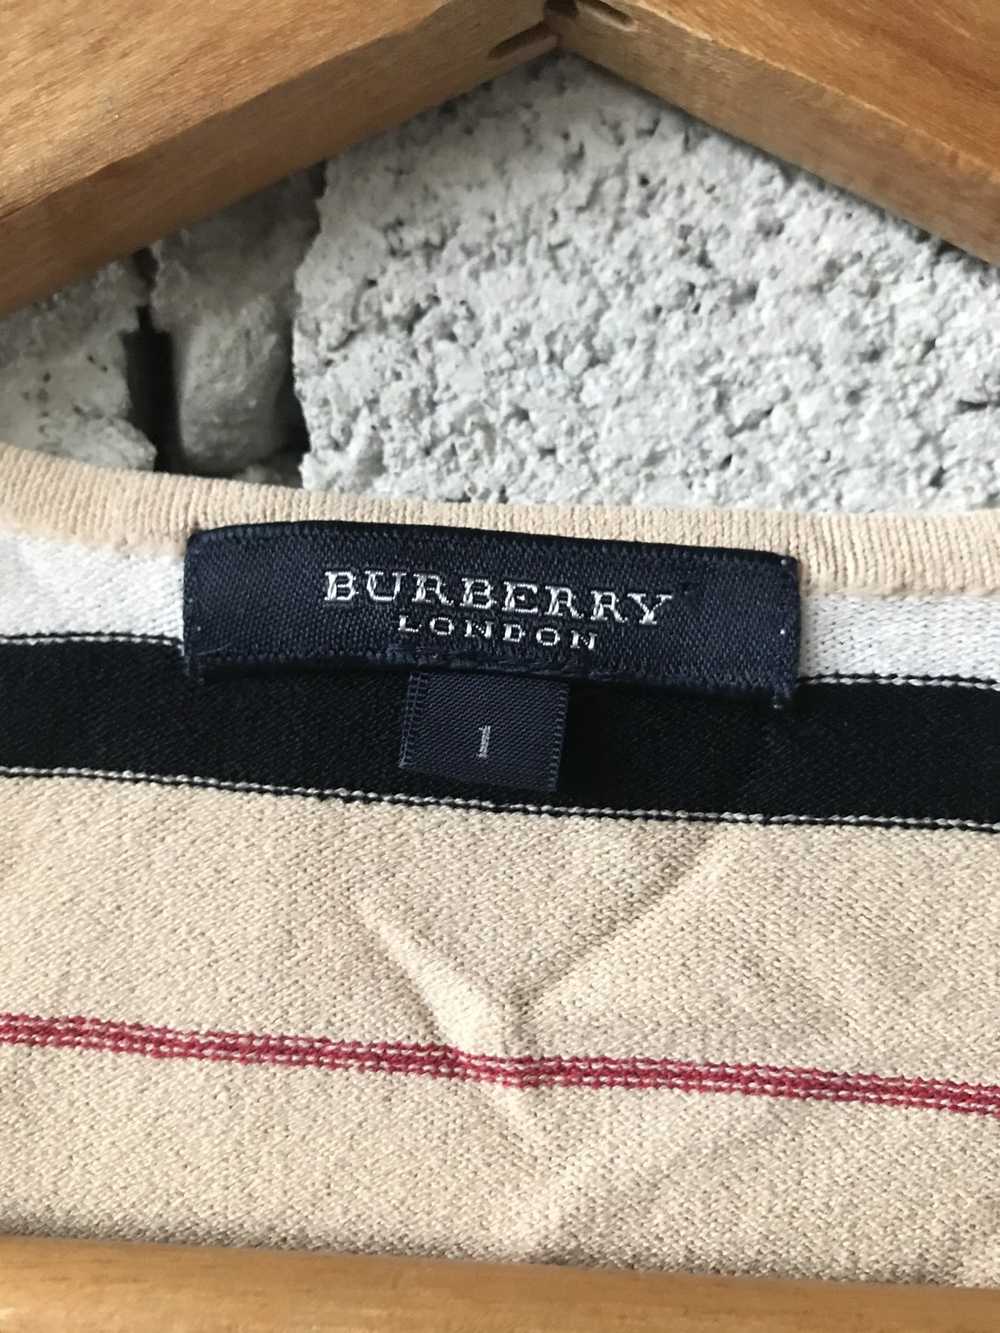 Burberry Burberry London Stretch Material - image 3